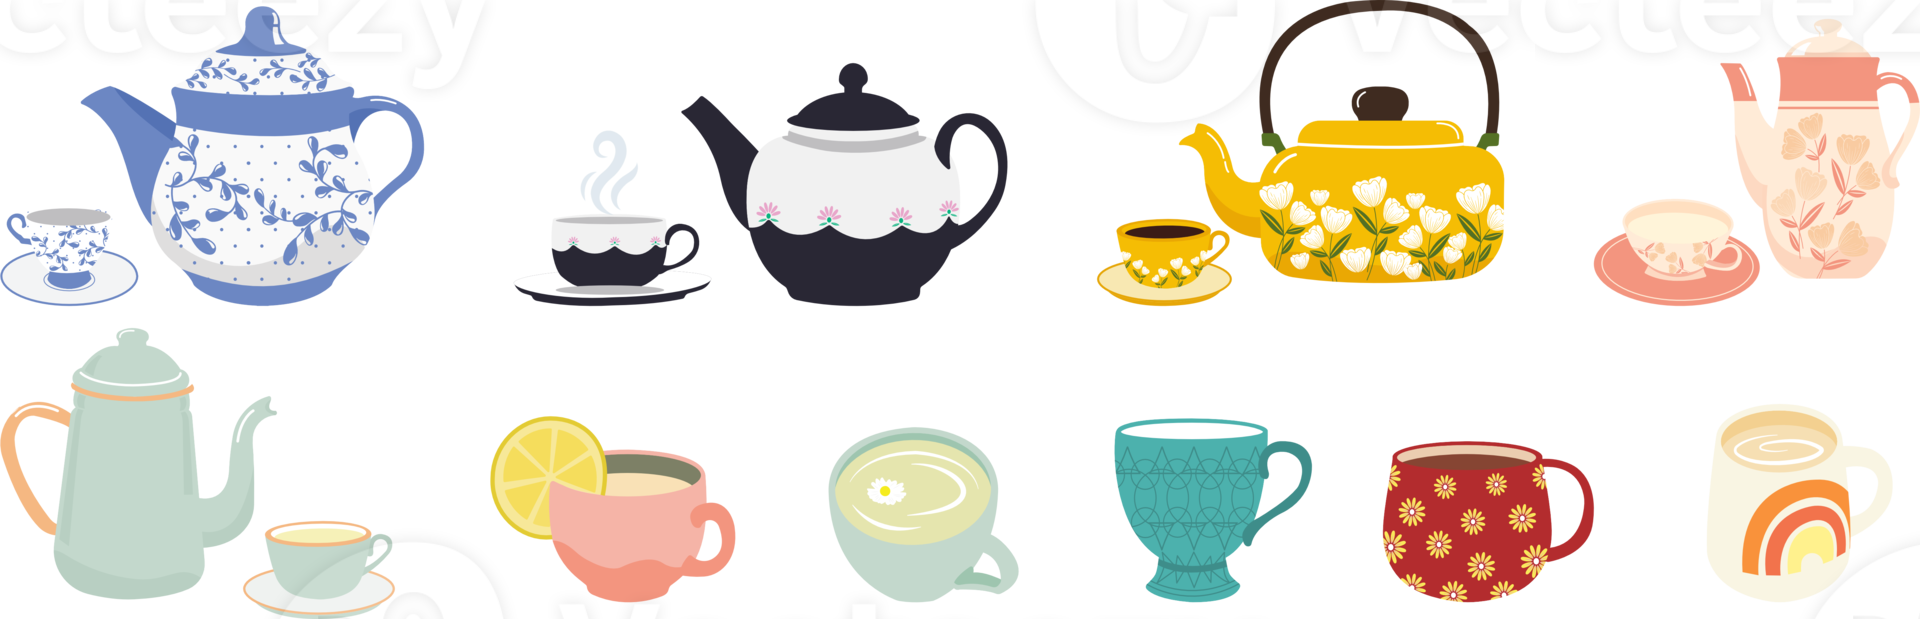 set of cartoon kettles. household utensils, cookware, and a teapot with a spout collection png